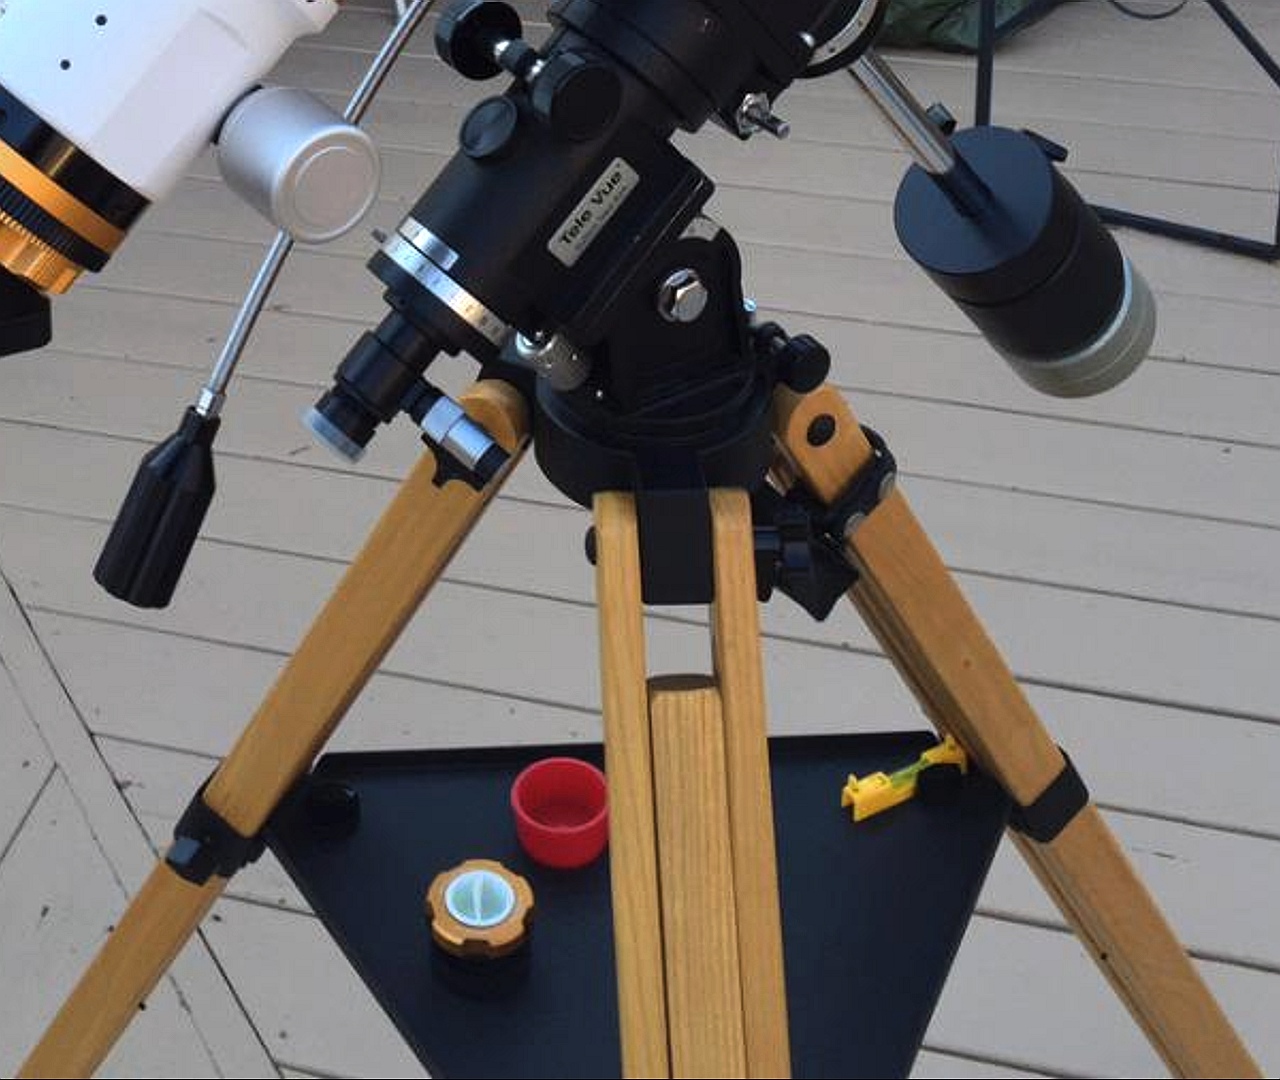 Width in-between lodge tripod legs at 20 inch height? Need it to